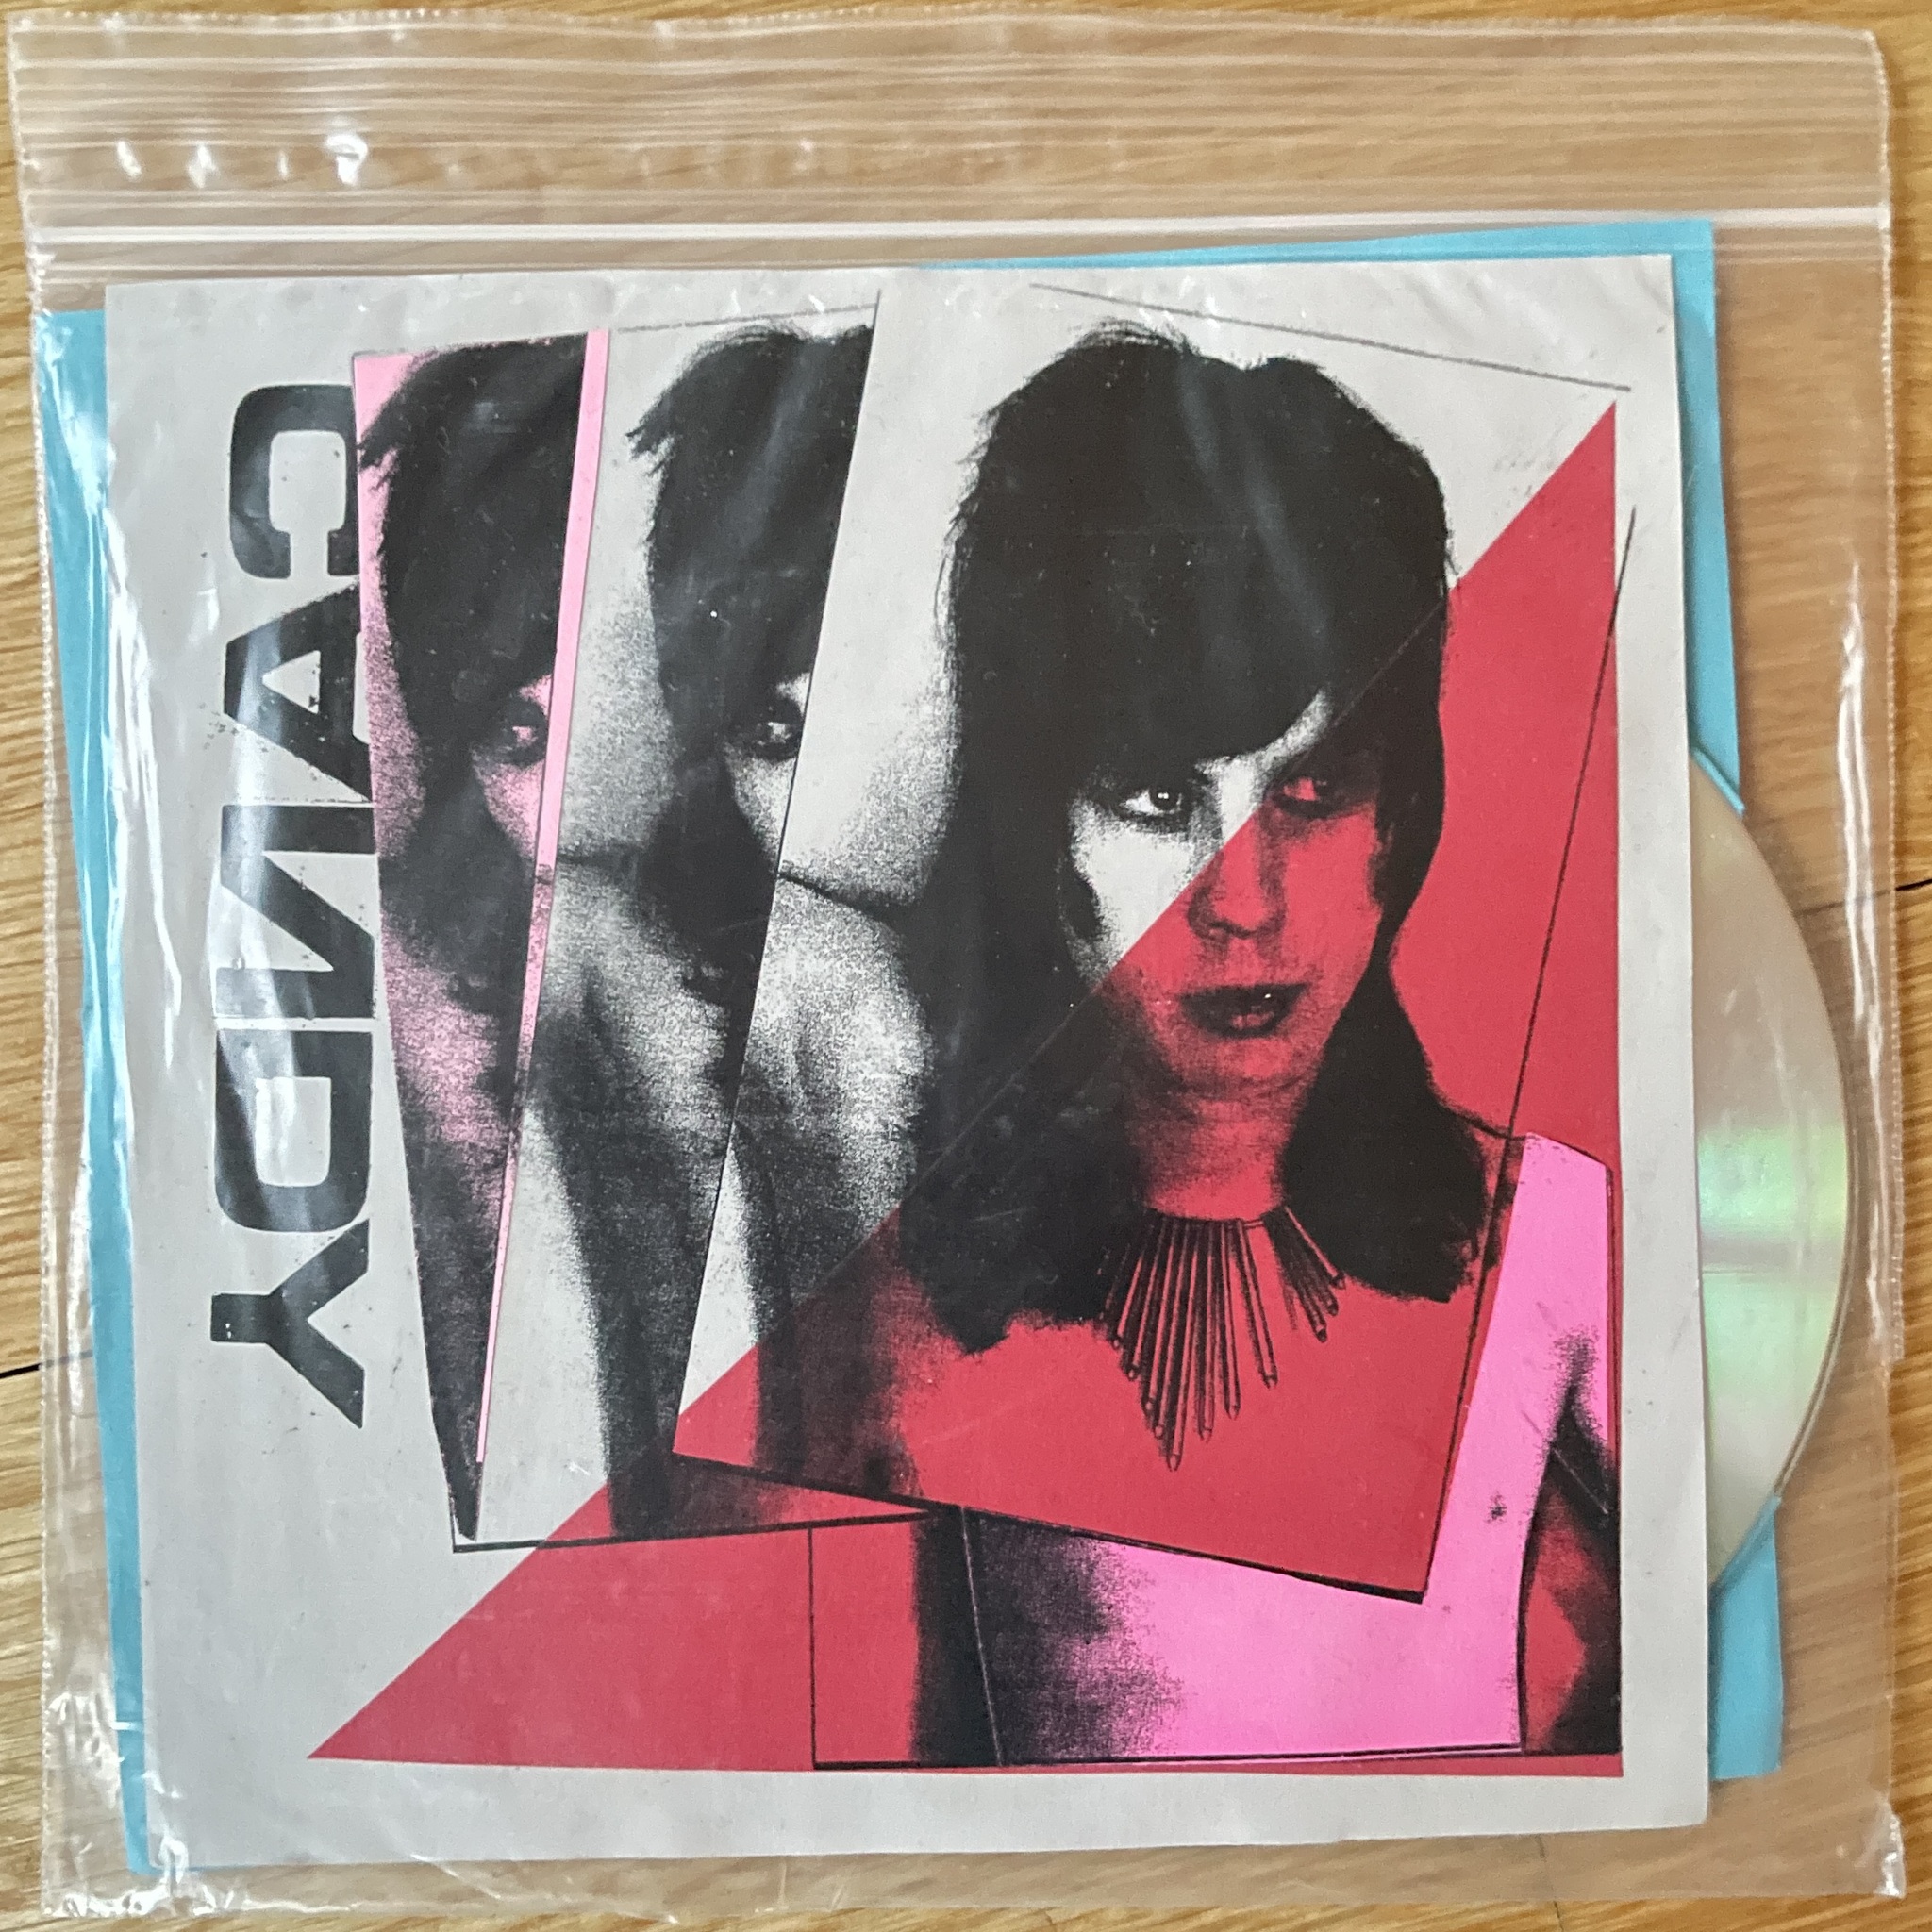 GLASS CANDY The Sick Sound Of... (Self released - USA original) (EX) CDR